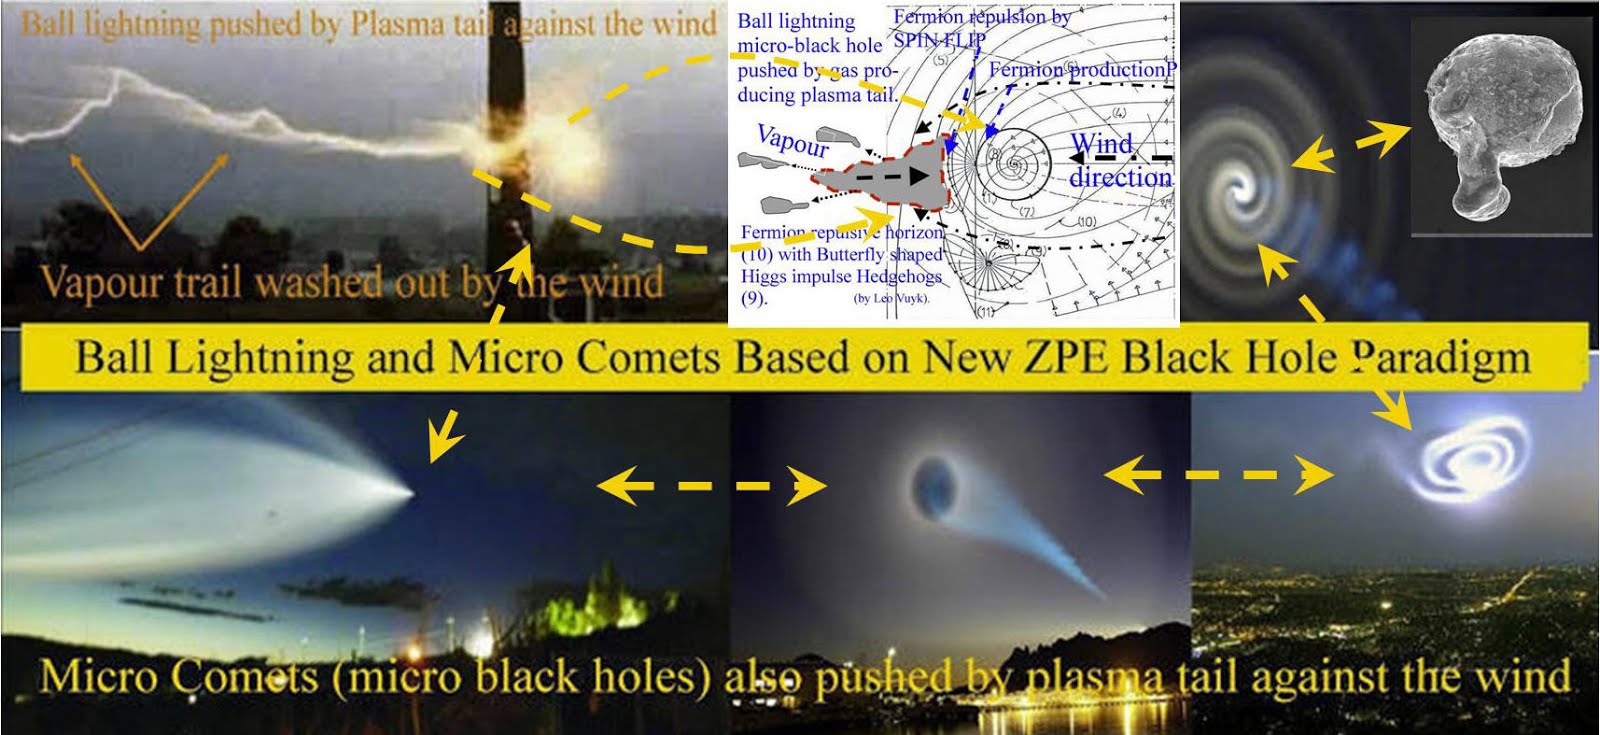 UFO SCIENCE and NEW PHYSICS